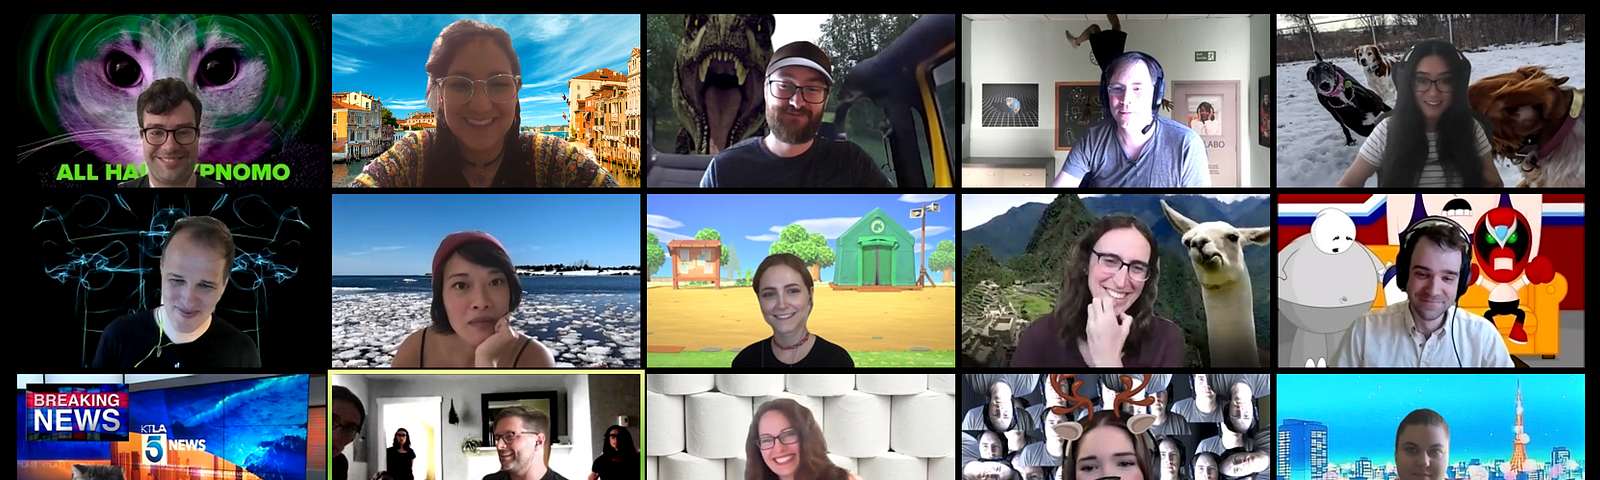 Screenshot of zoom backgrounds and people smiling.